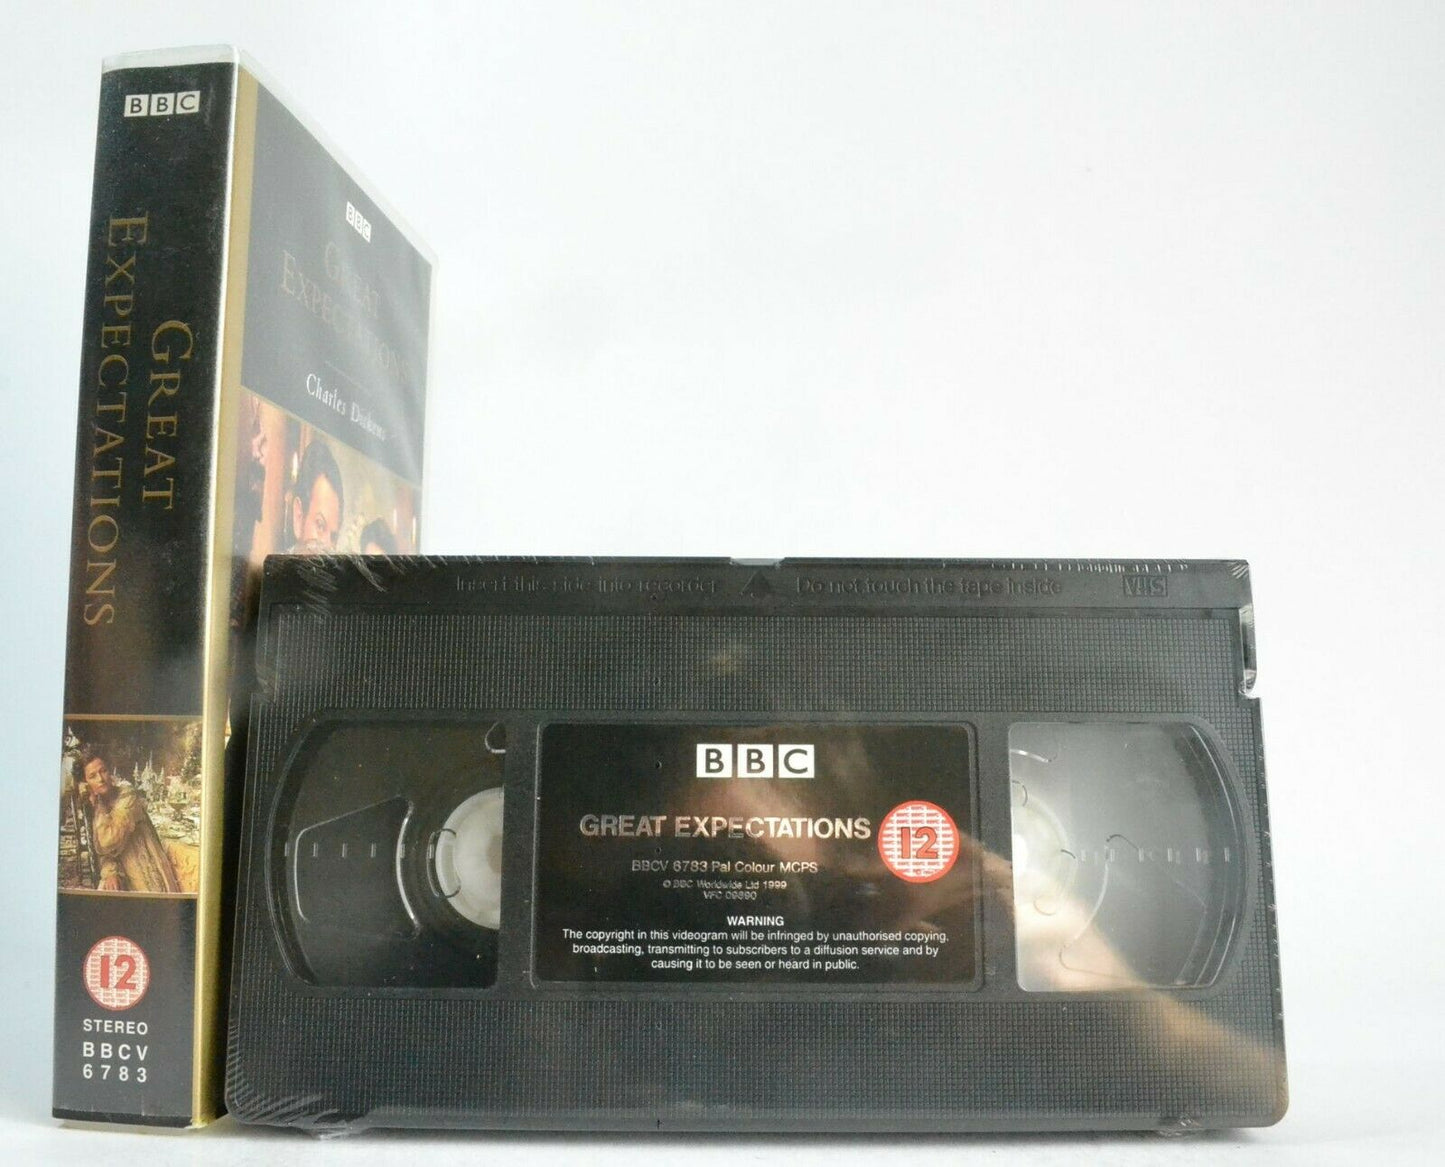 Great Expectations (BBC); [Charles Dickens] Drama - Brand New Sealed - Pal VHS-